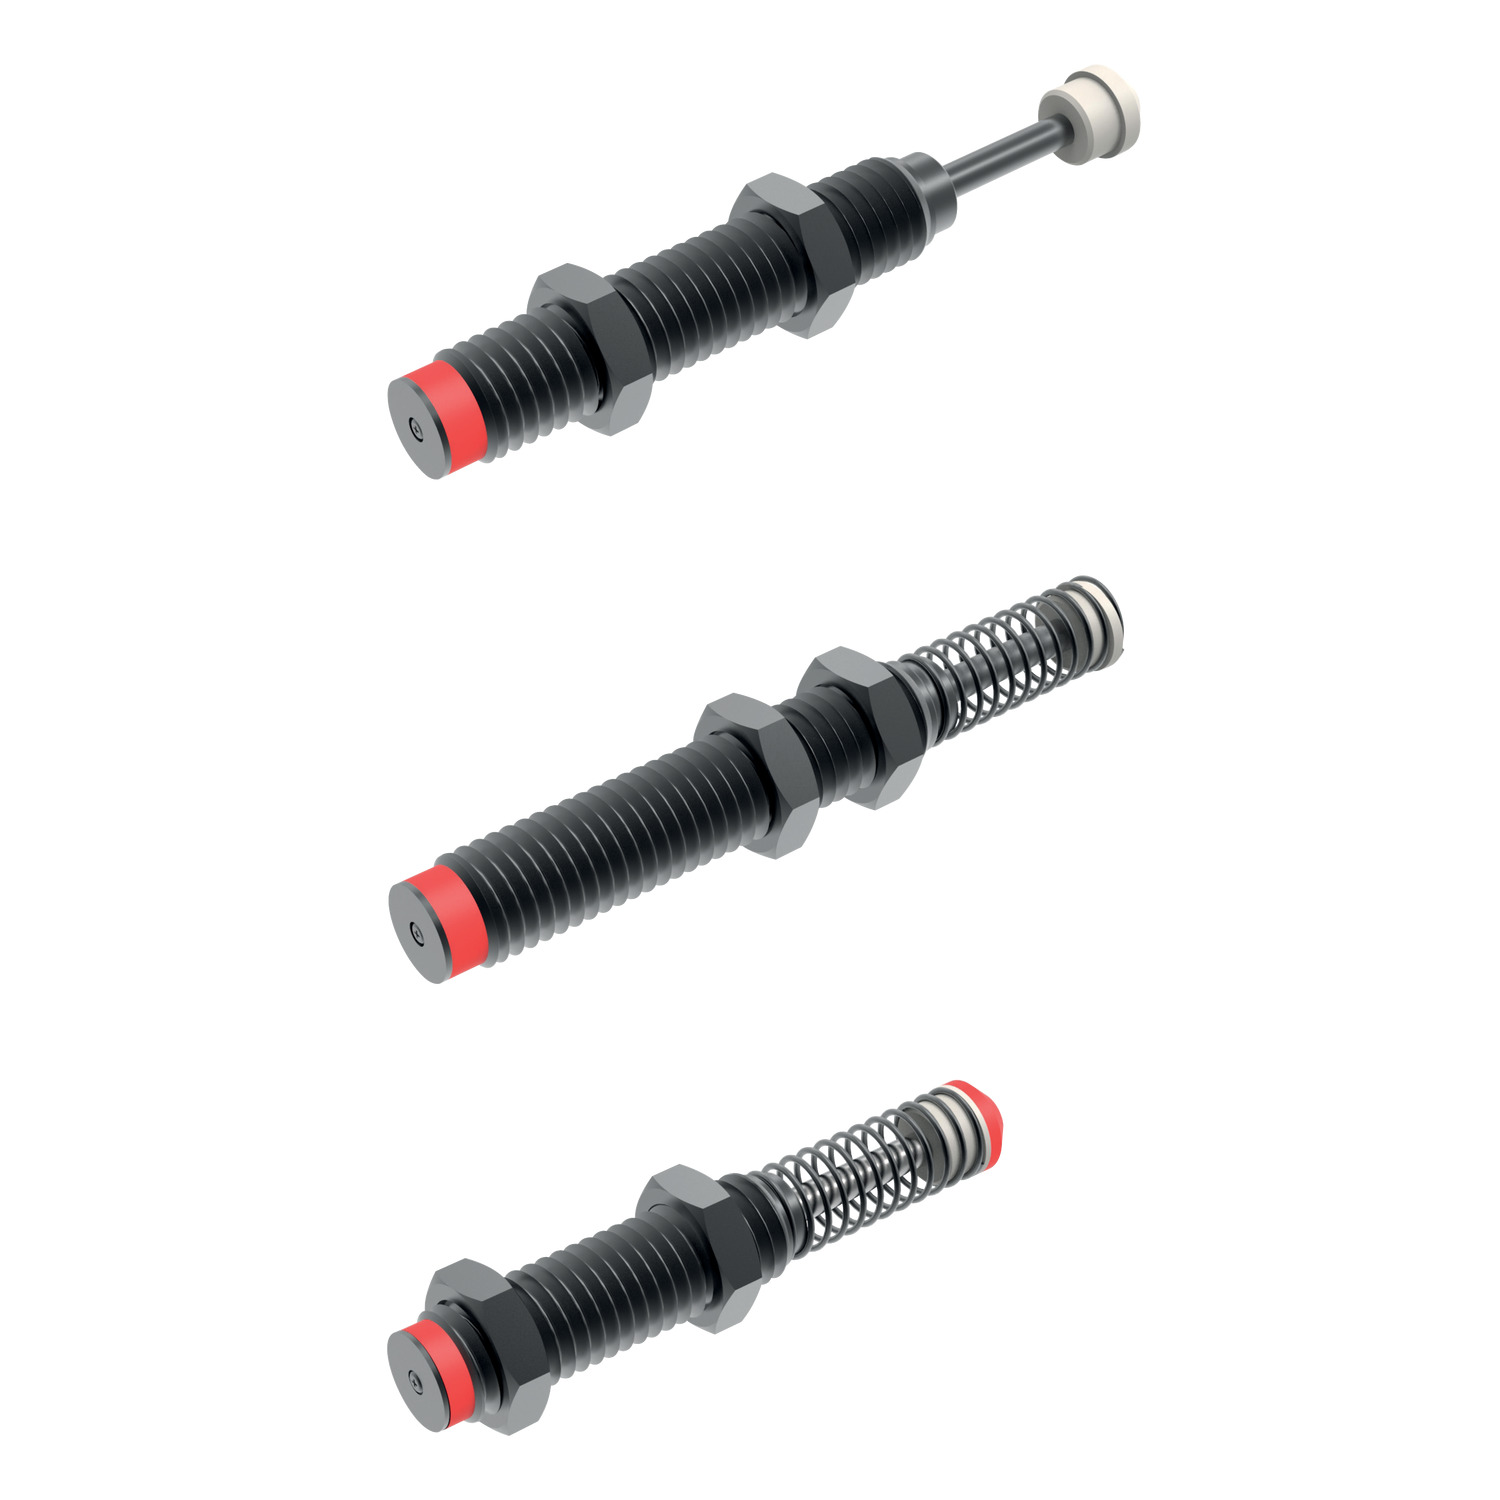 Product 68008, Shock Absorbers, Self Compensating M14 - M20, non-adjustable / 